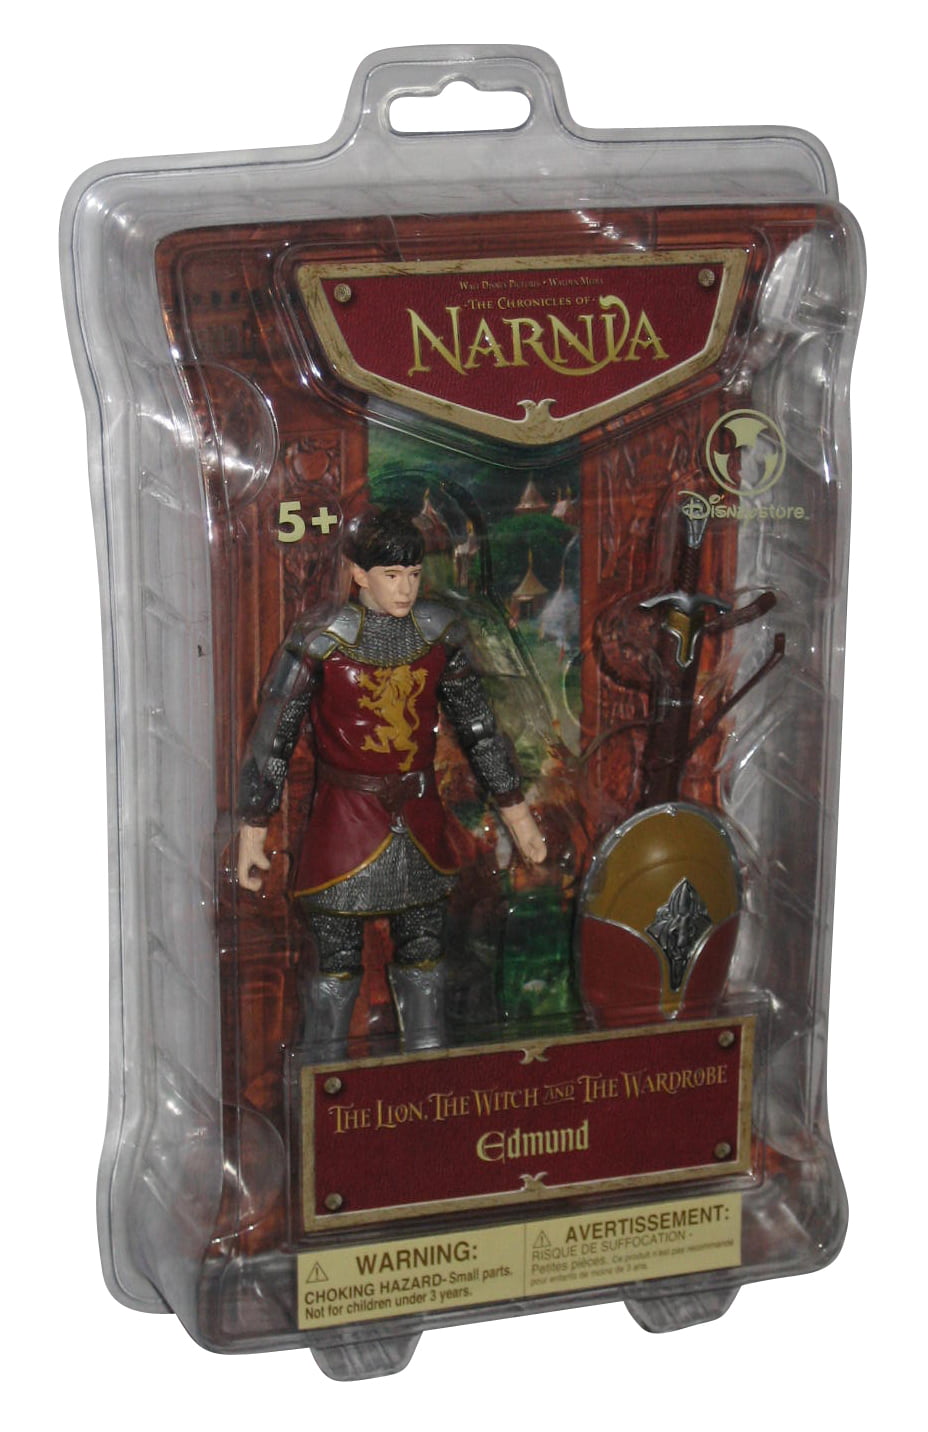 Disney Store The Chronicles of Narnia Edmund Action Figure 